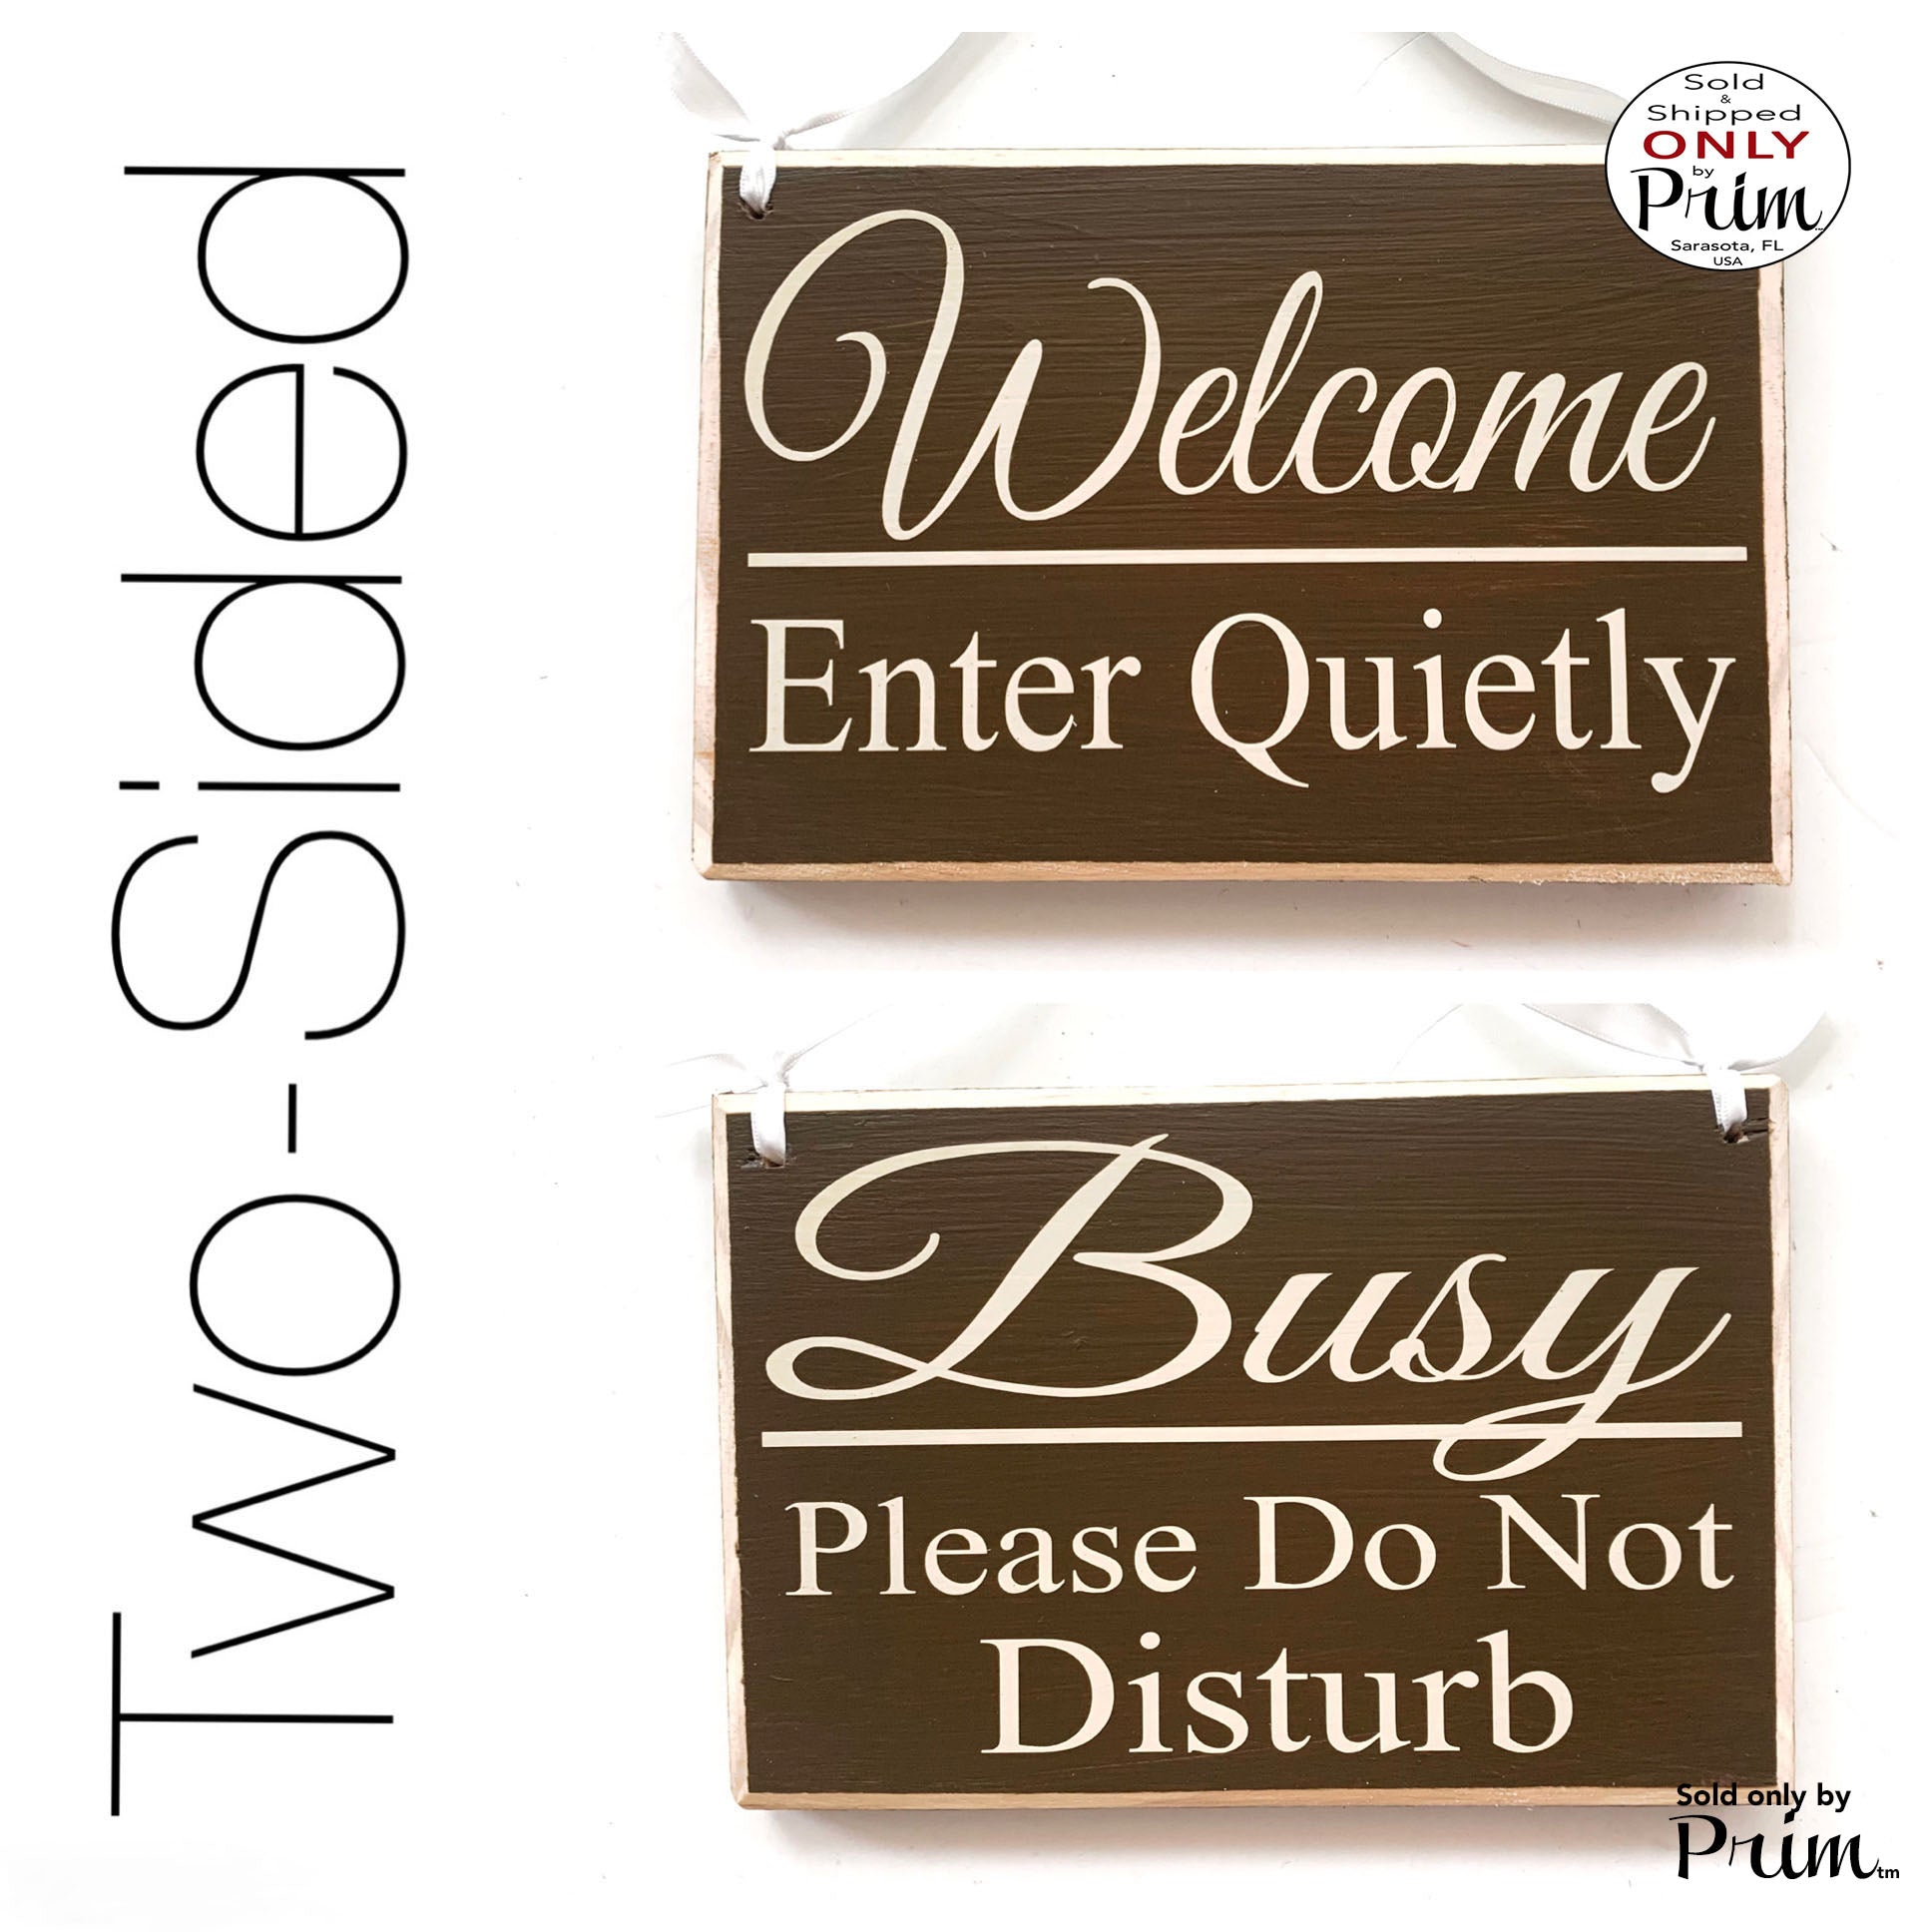 Two Sided 8x6 Welcome Enter Quietly Busy Please Do Not Disturb Custom Wood Sign Please Knock Busy Open Closed Spa Salon Office Door Hanger Designs by Prim